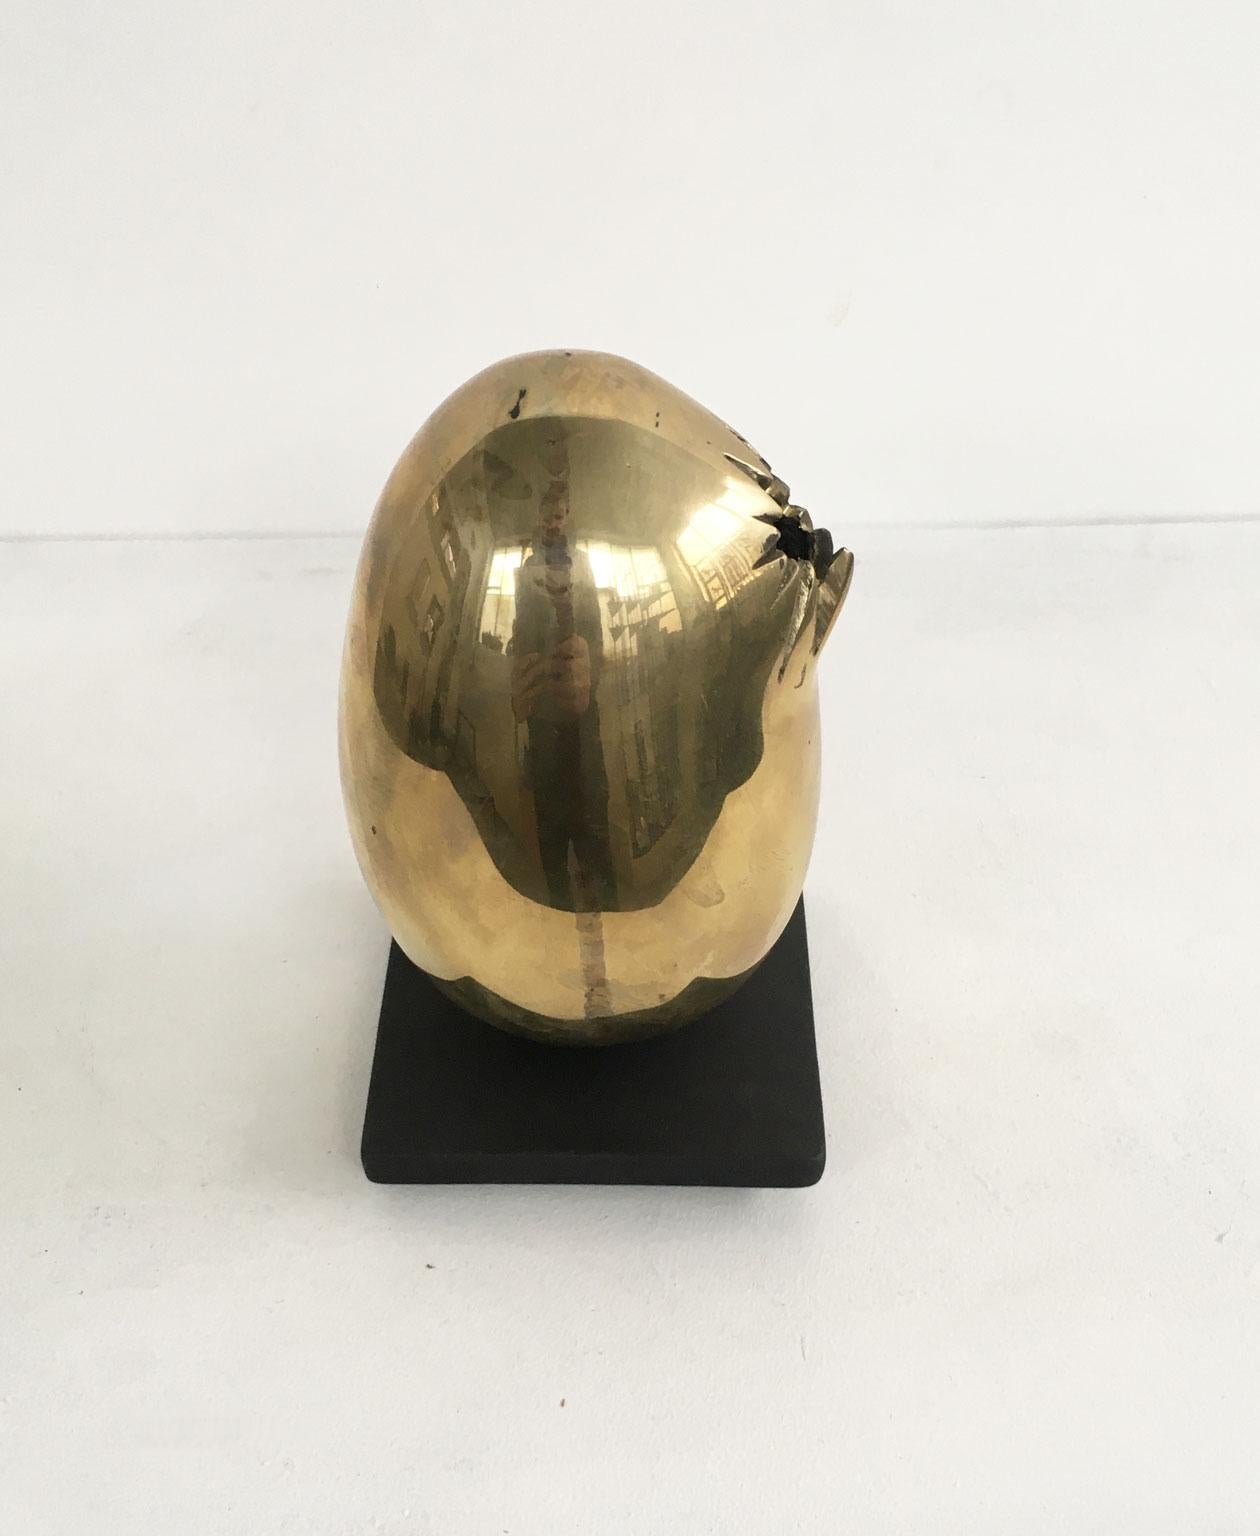 Italian 1978 Italy Bronze Abstract Sculpture by Fanna Roncoroni Forma Ovale Oval Shape For Sale